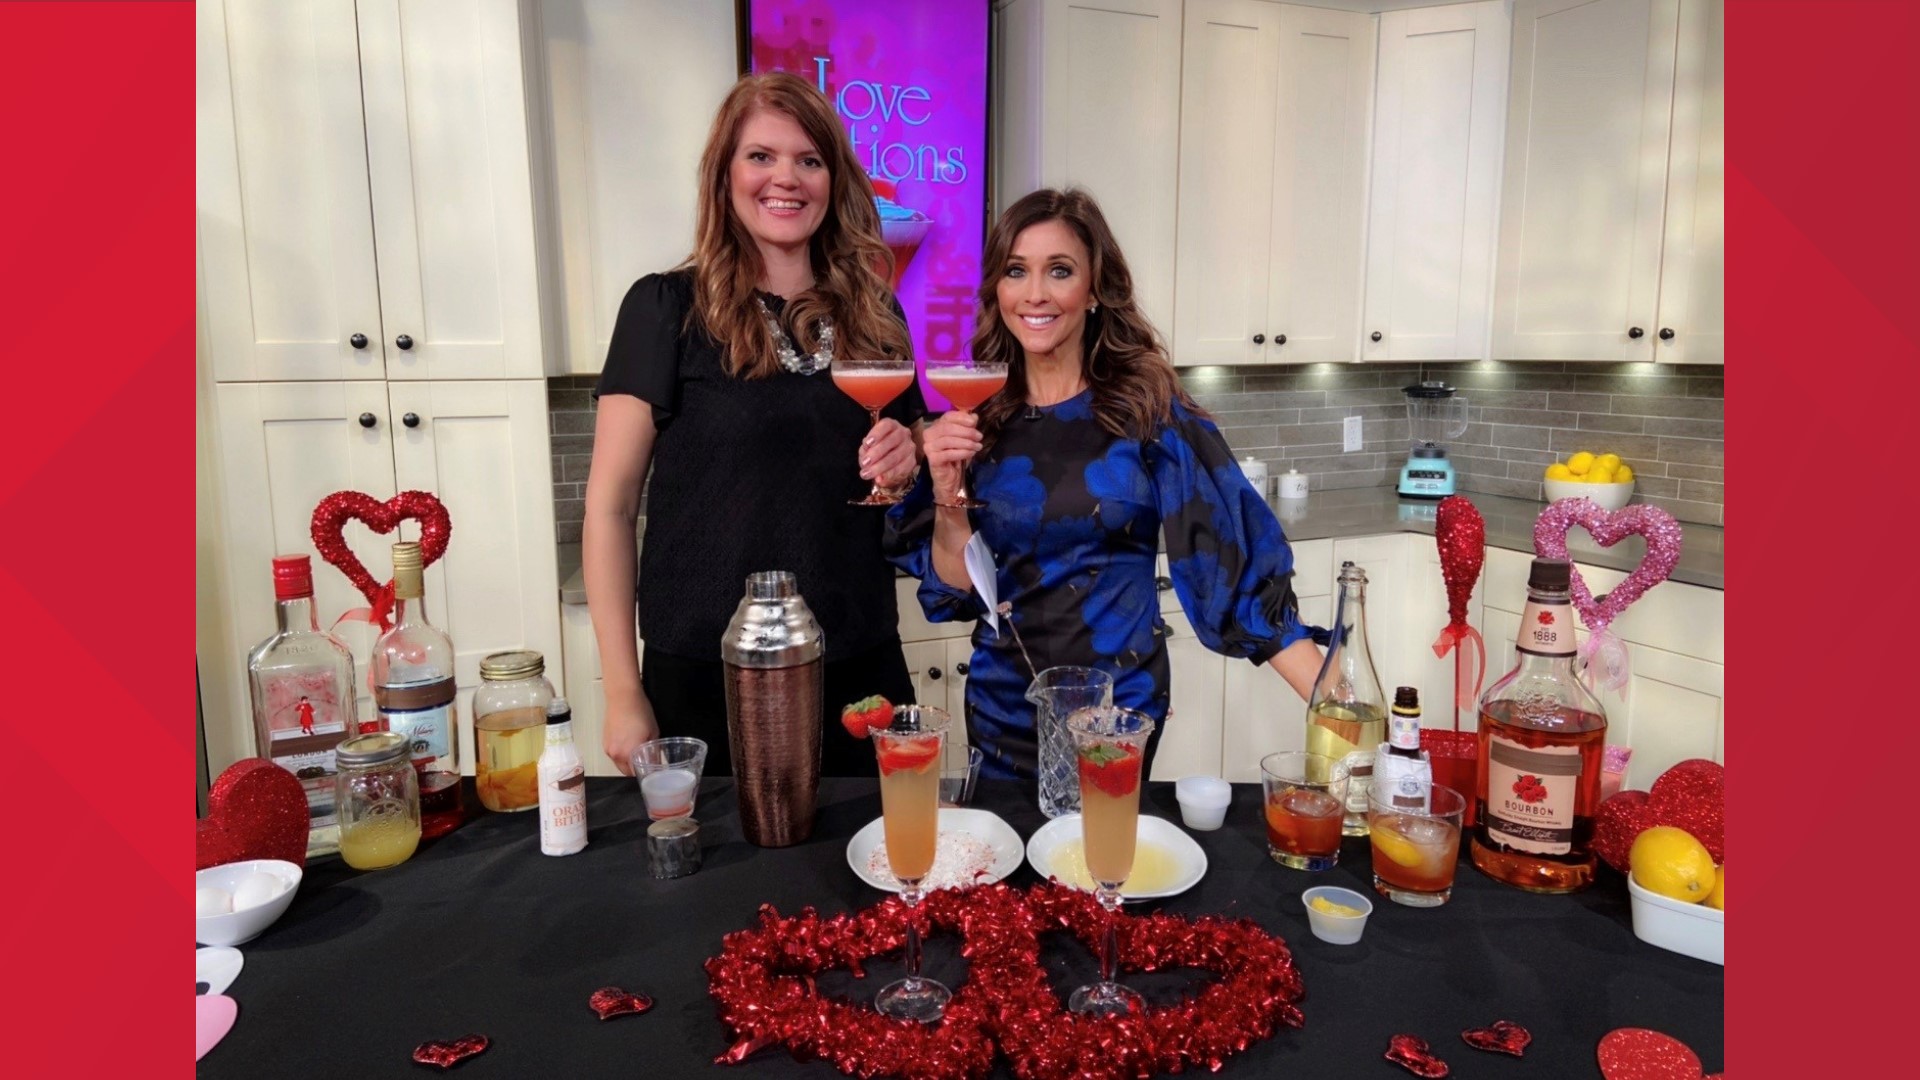 Sumptuous Living's Mandy Landefeld shares the perfect cocktails for your sweetheart on 'Atlanta & Company'